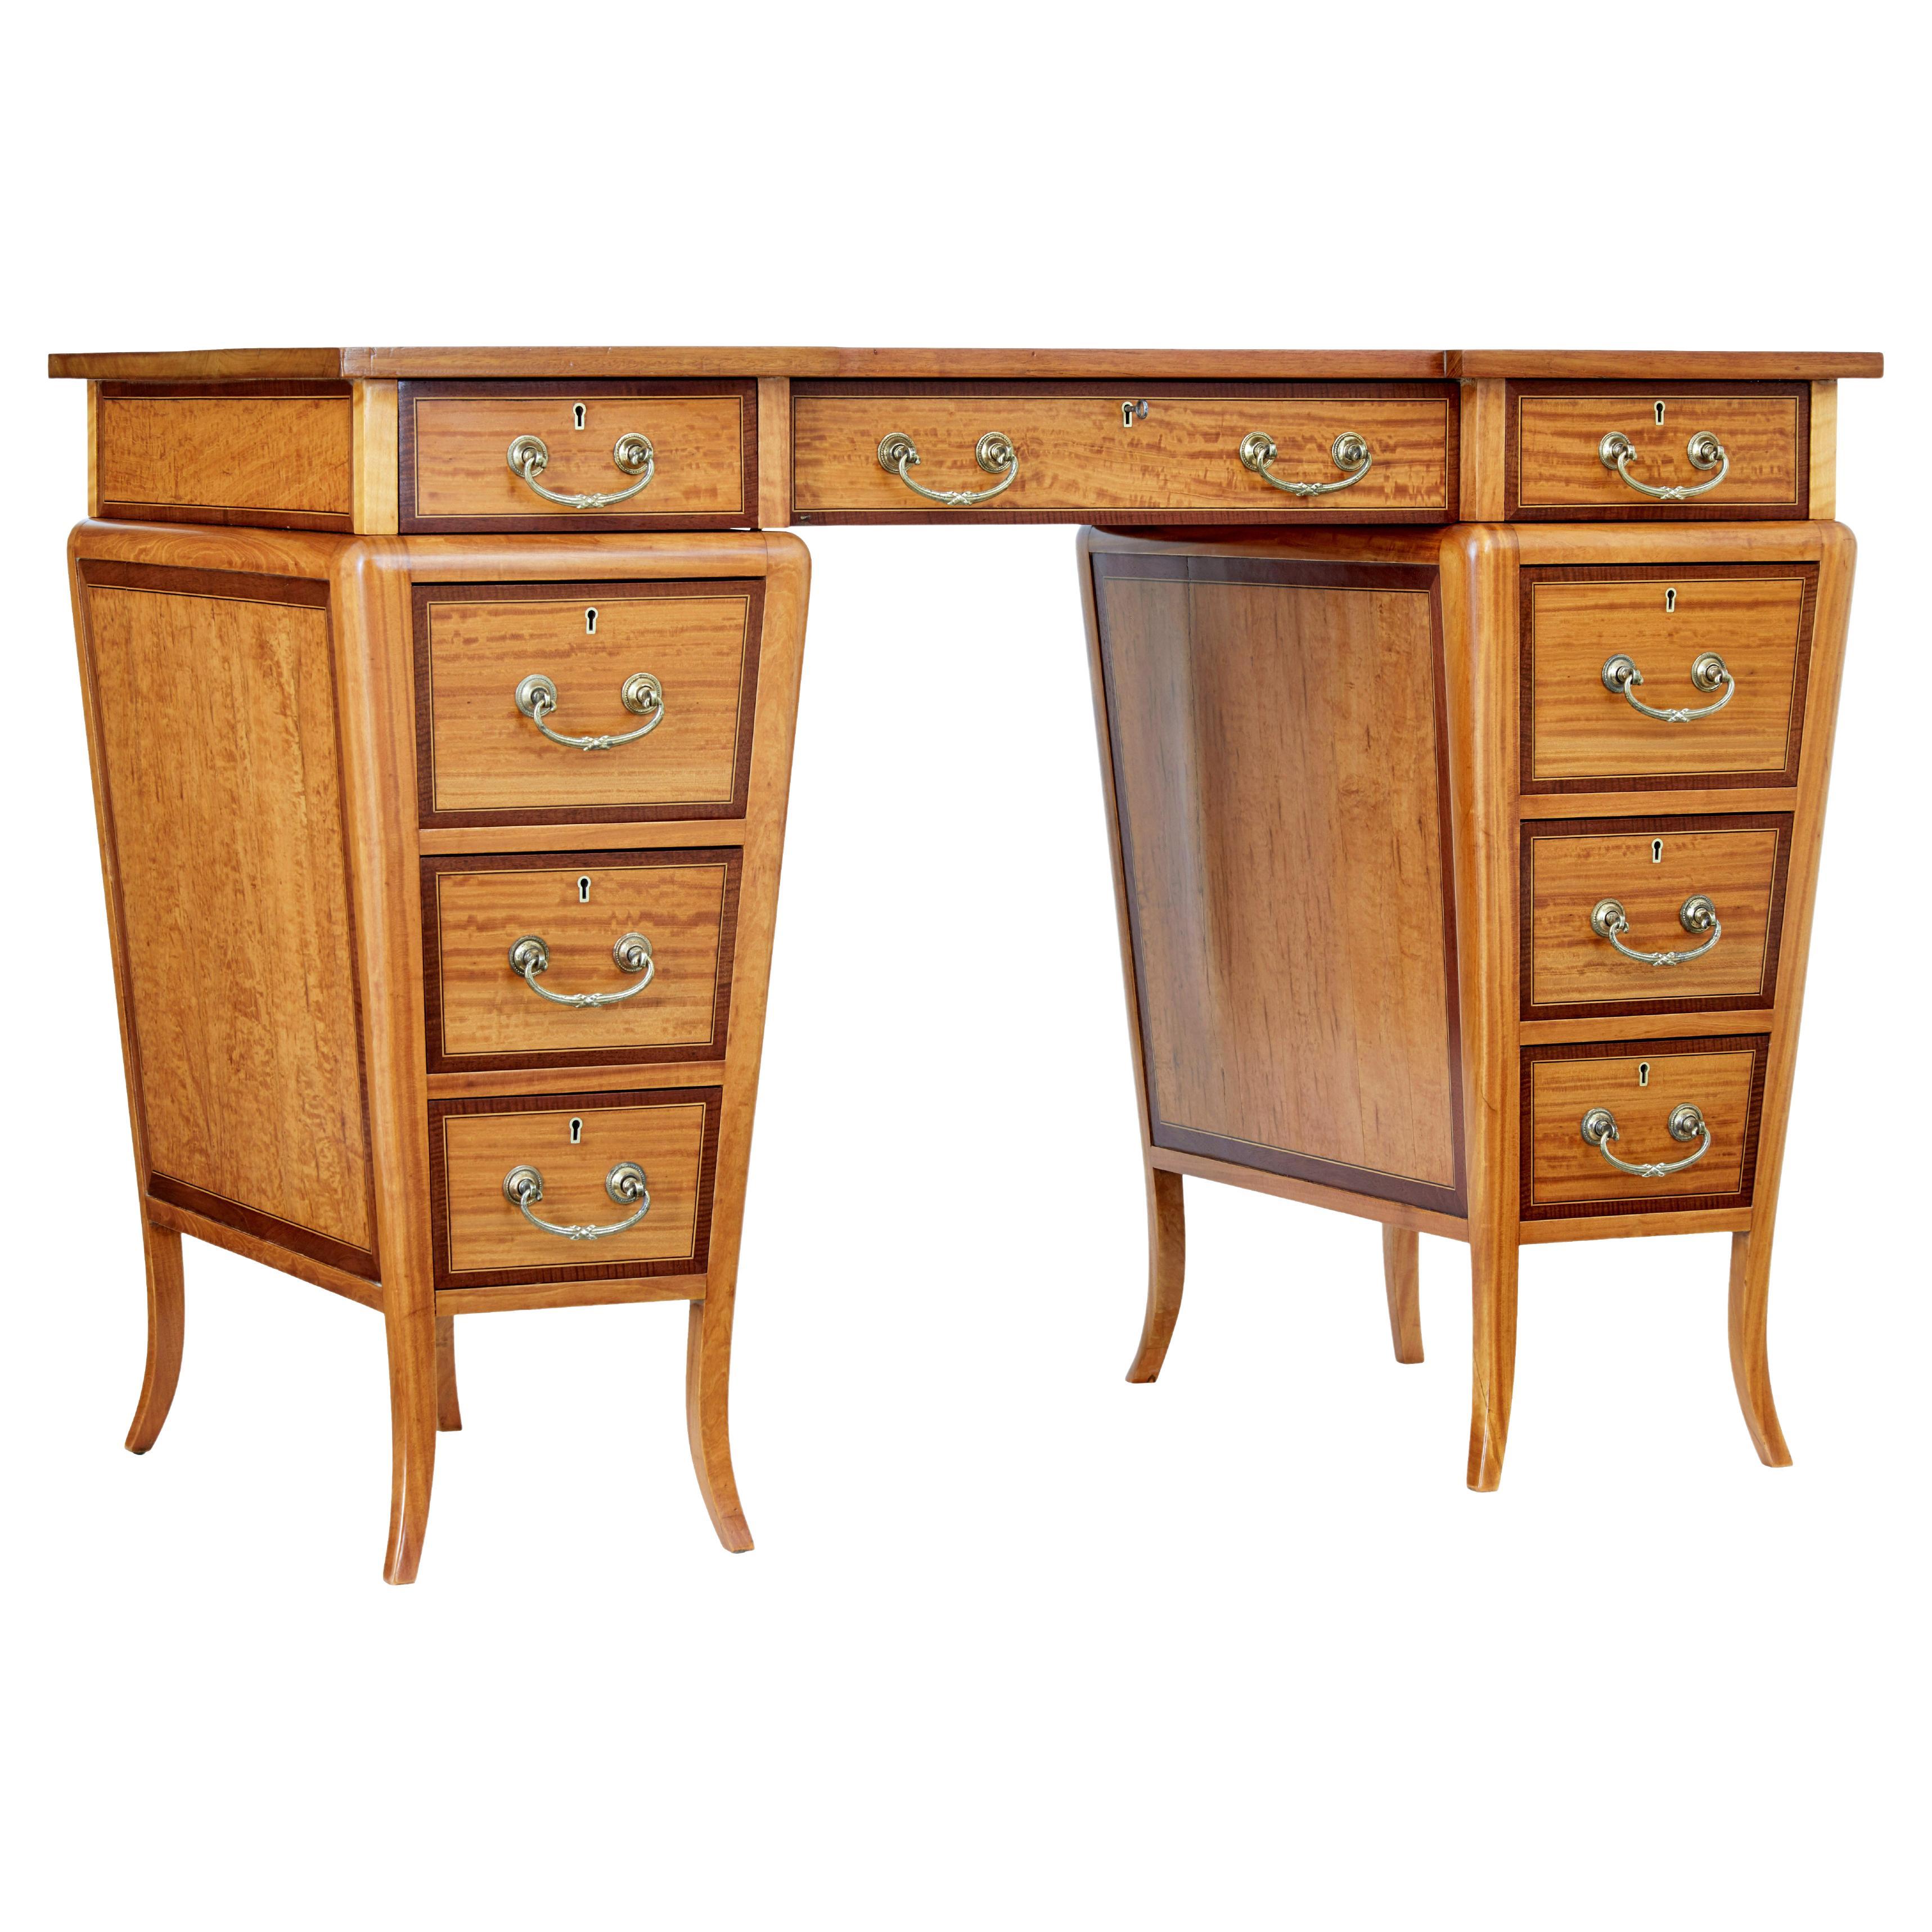 Early 20th Century Satinwood Sheraton Revival Desk